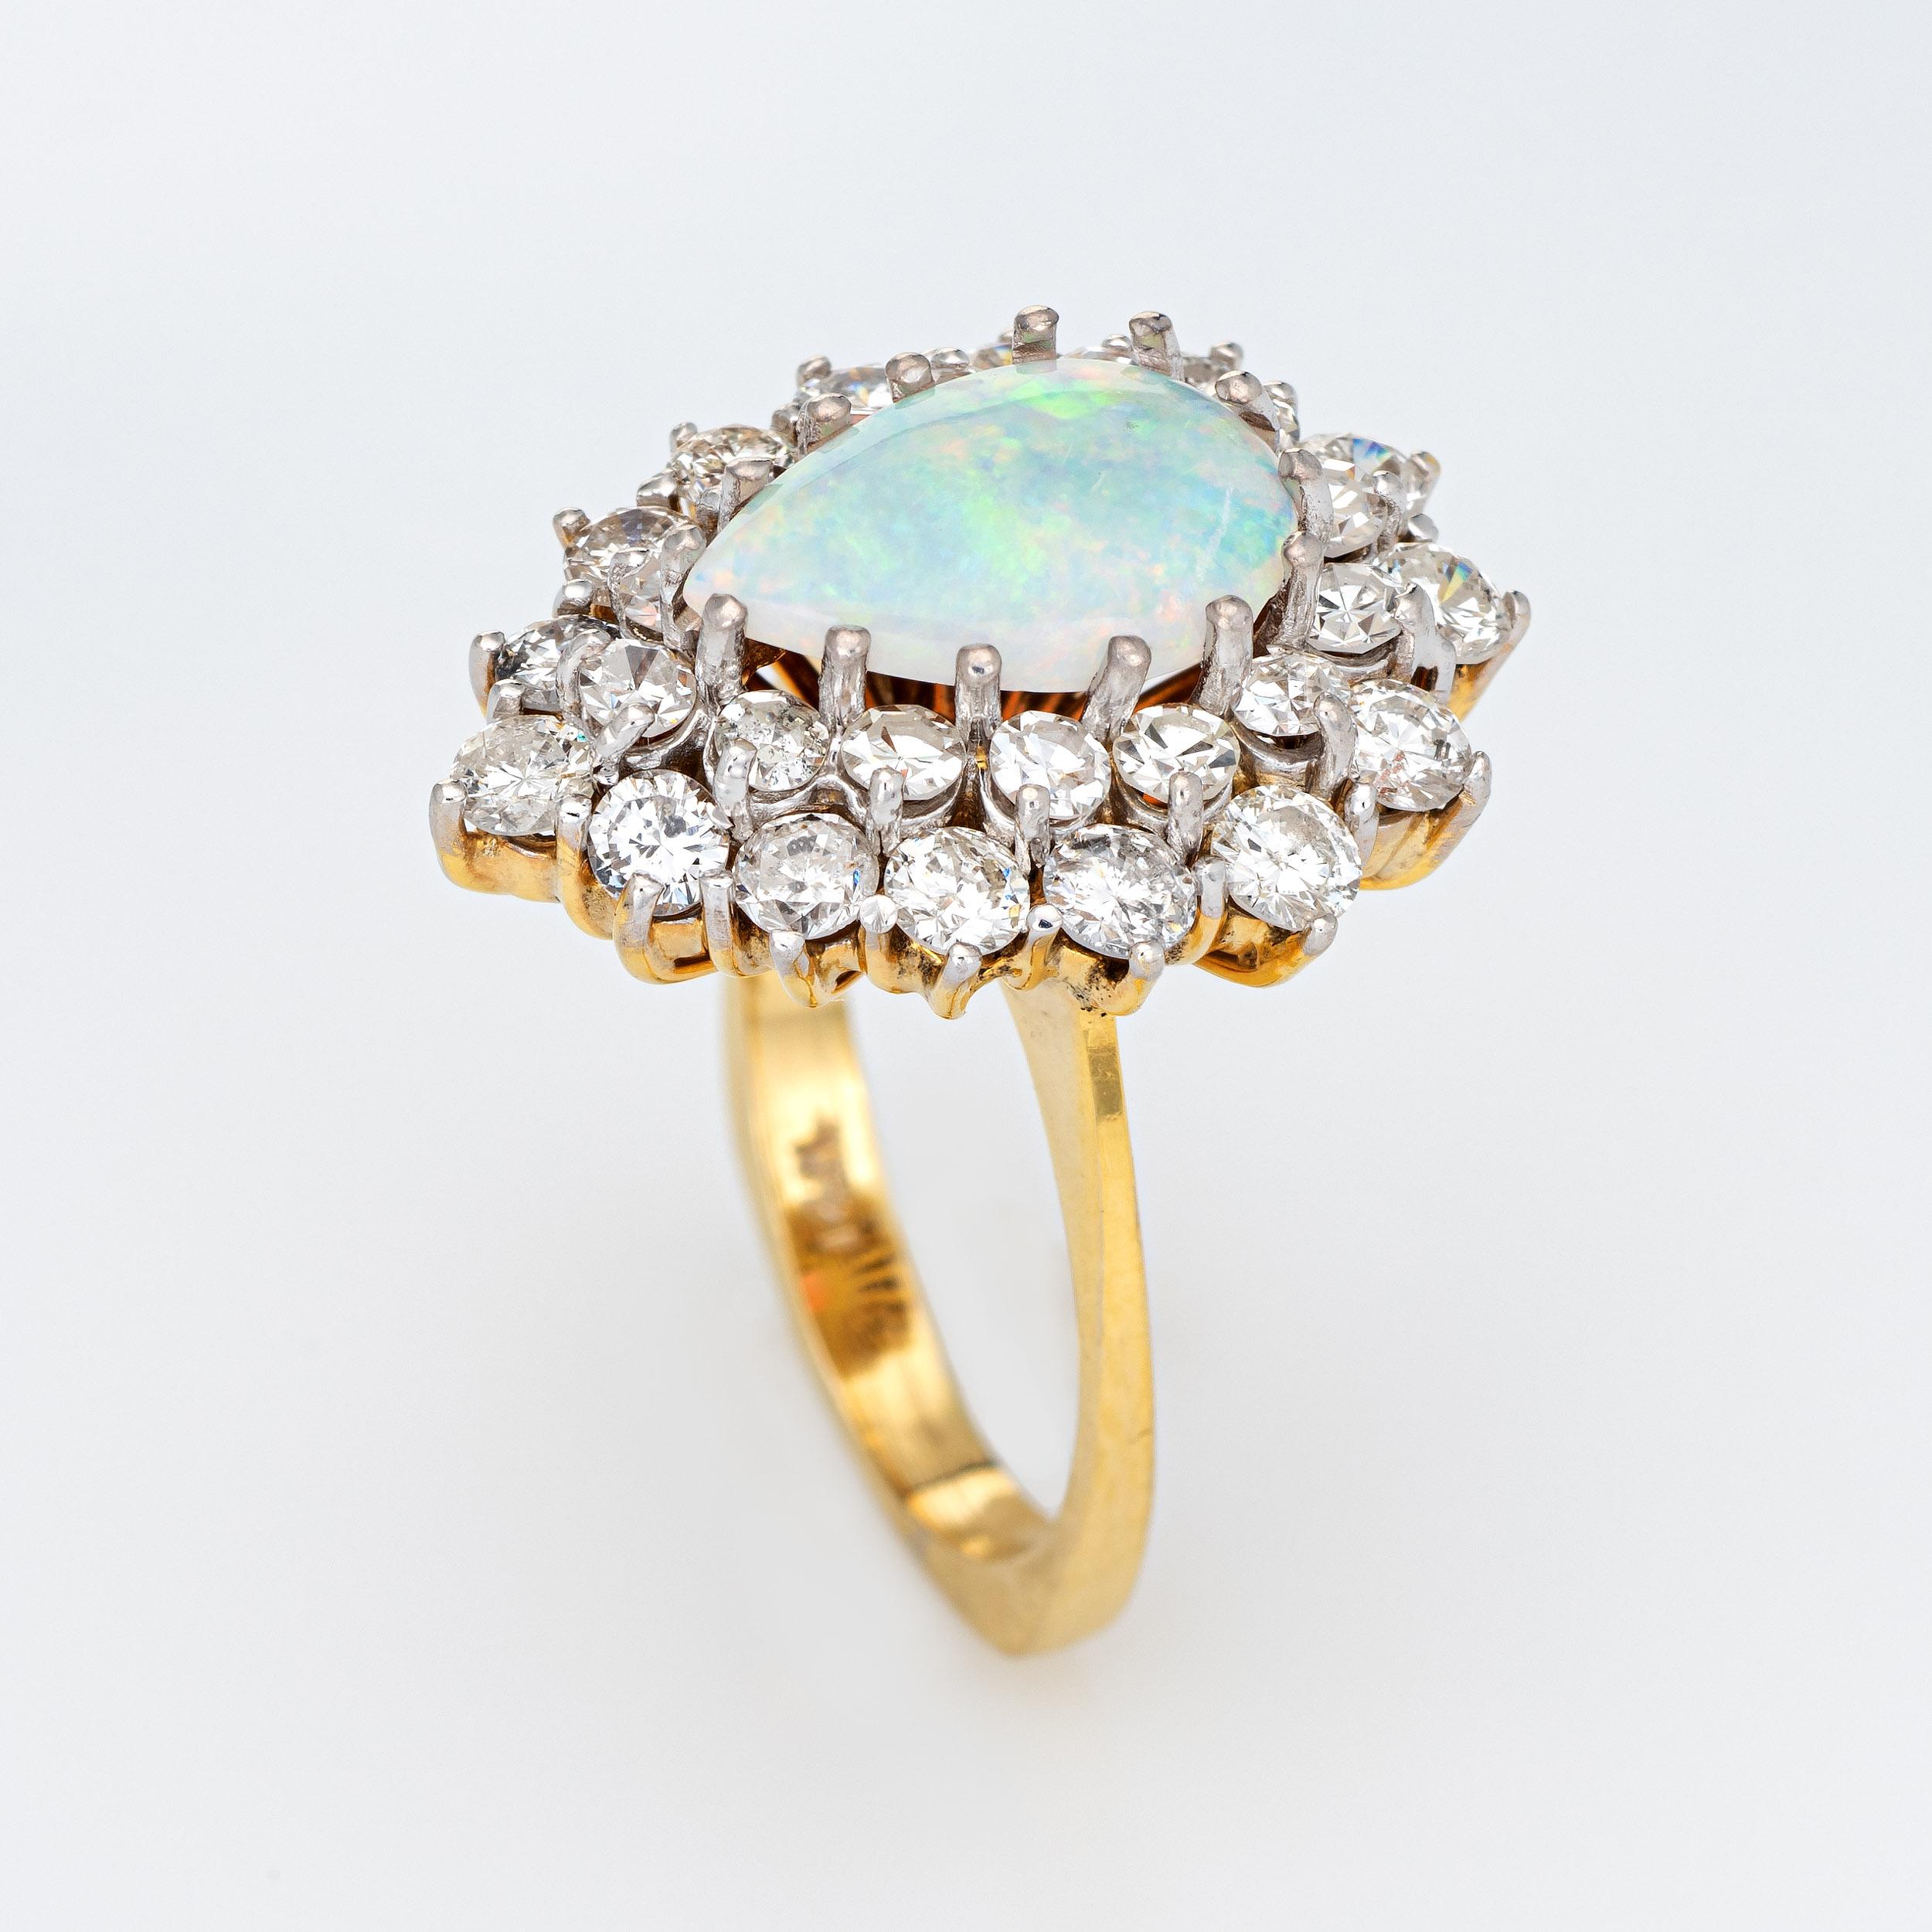 Stylish opal & diamond ring (circa 1980s to 1990s) crafted in 14k yellow gold. 

Natural opal measures 11mm x 8mm (estimated at 1.50 carats), accented with an estimated 2 carats of round brilliant cut diamonds. The diamonds are estimated at H-I